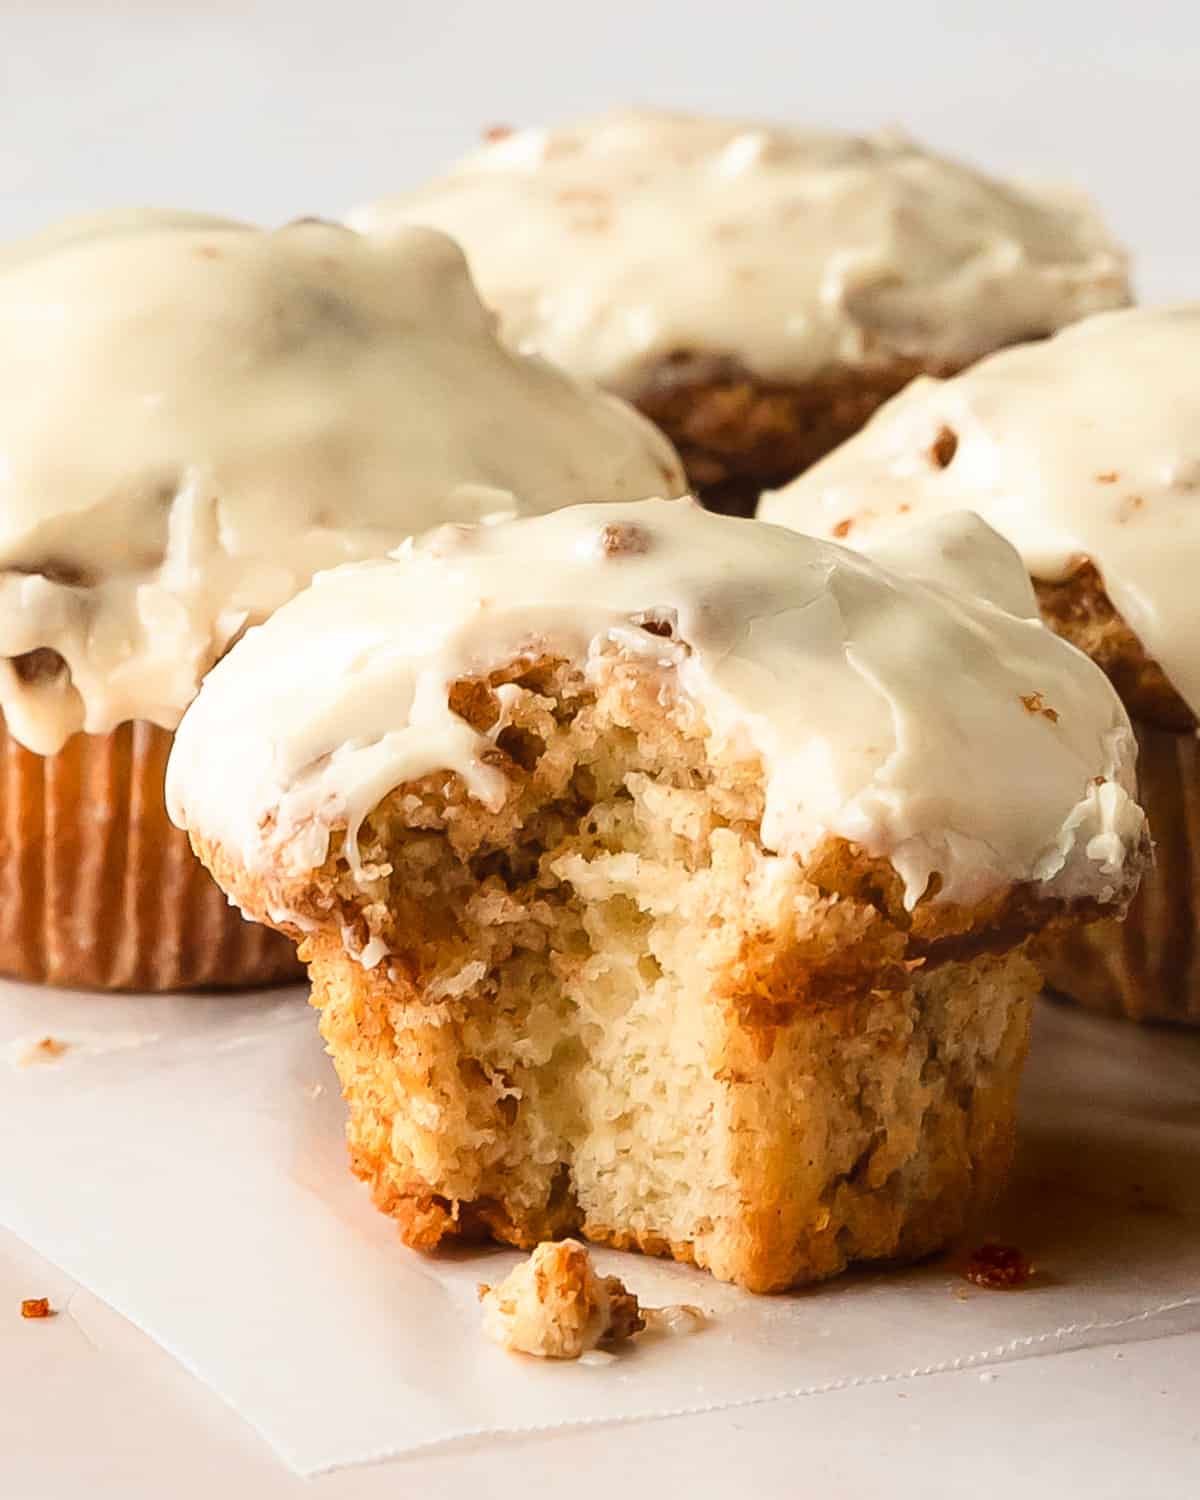 Cinnamon roll muffins are wonderfully soft, light and fluffy no yeast muffins filled with ribbons of sweet cinnamon roll filling.  Once baked, these cute cinnamon rolls muffins are topped with a sweet and tangy cream cheese glaze. These cinnamon bun muffins are quick, easy to make and muffins are perfect for breakfasts or snacks.